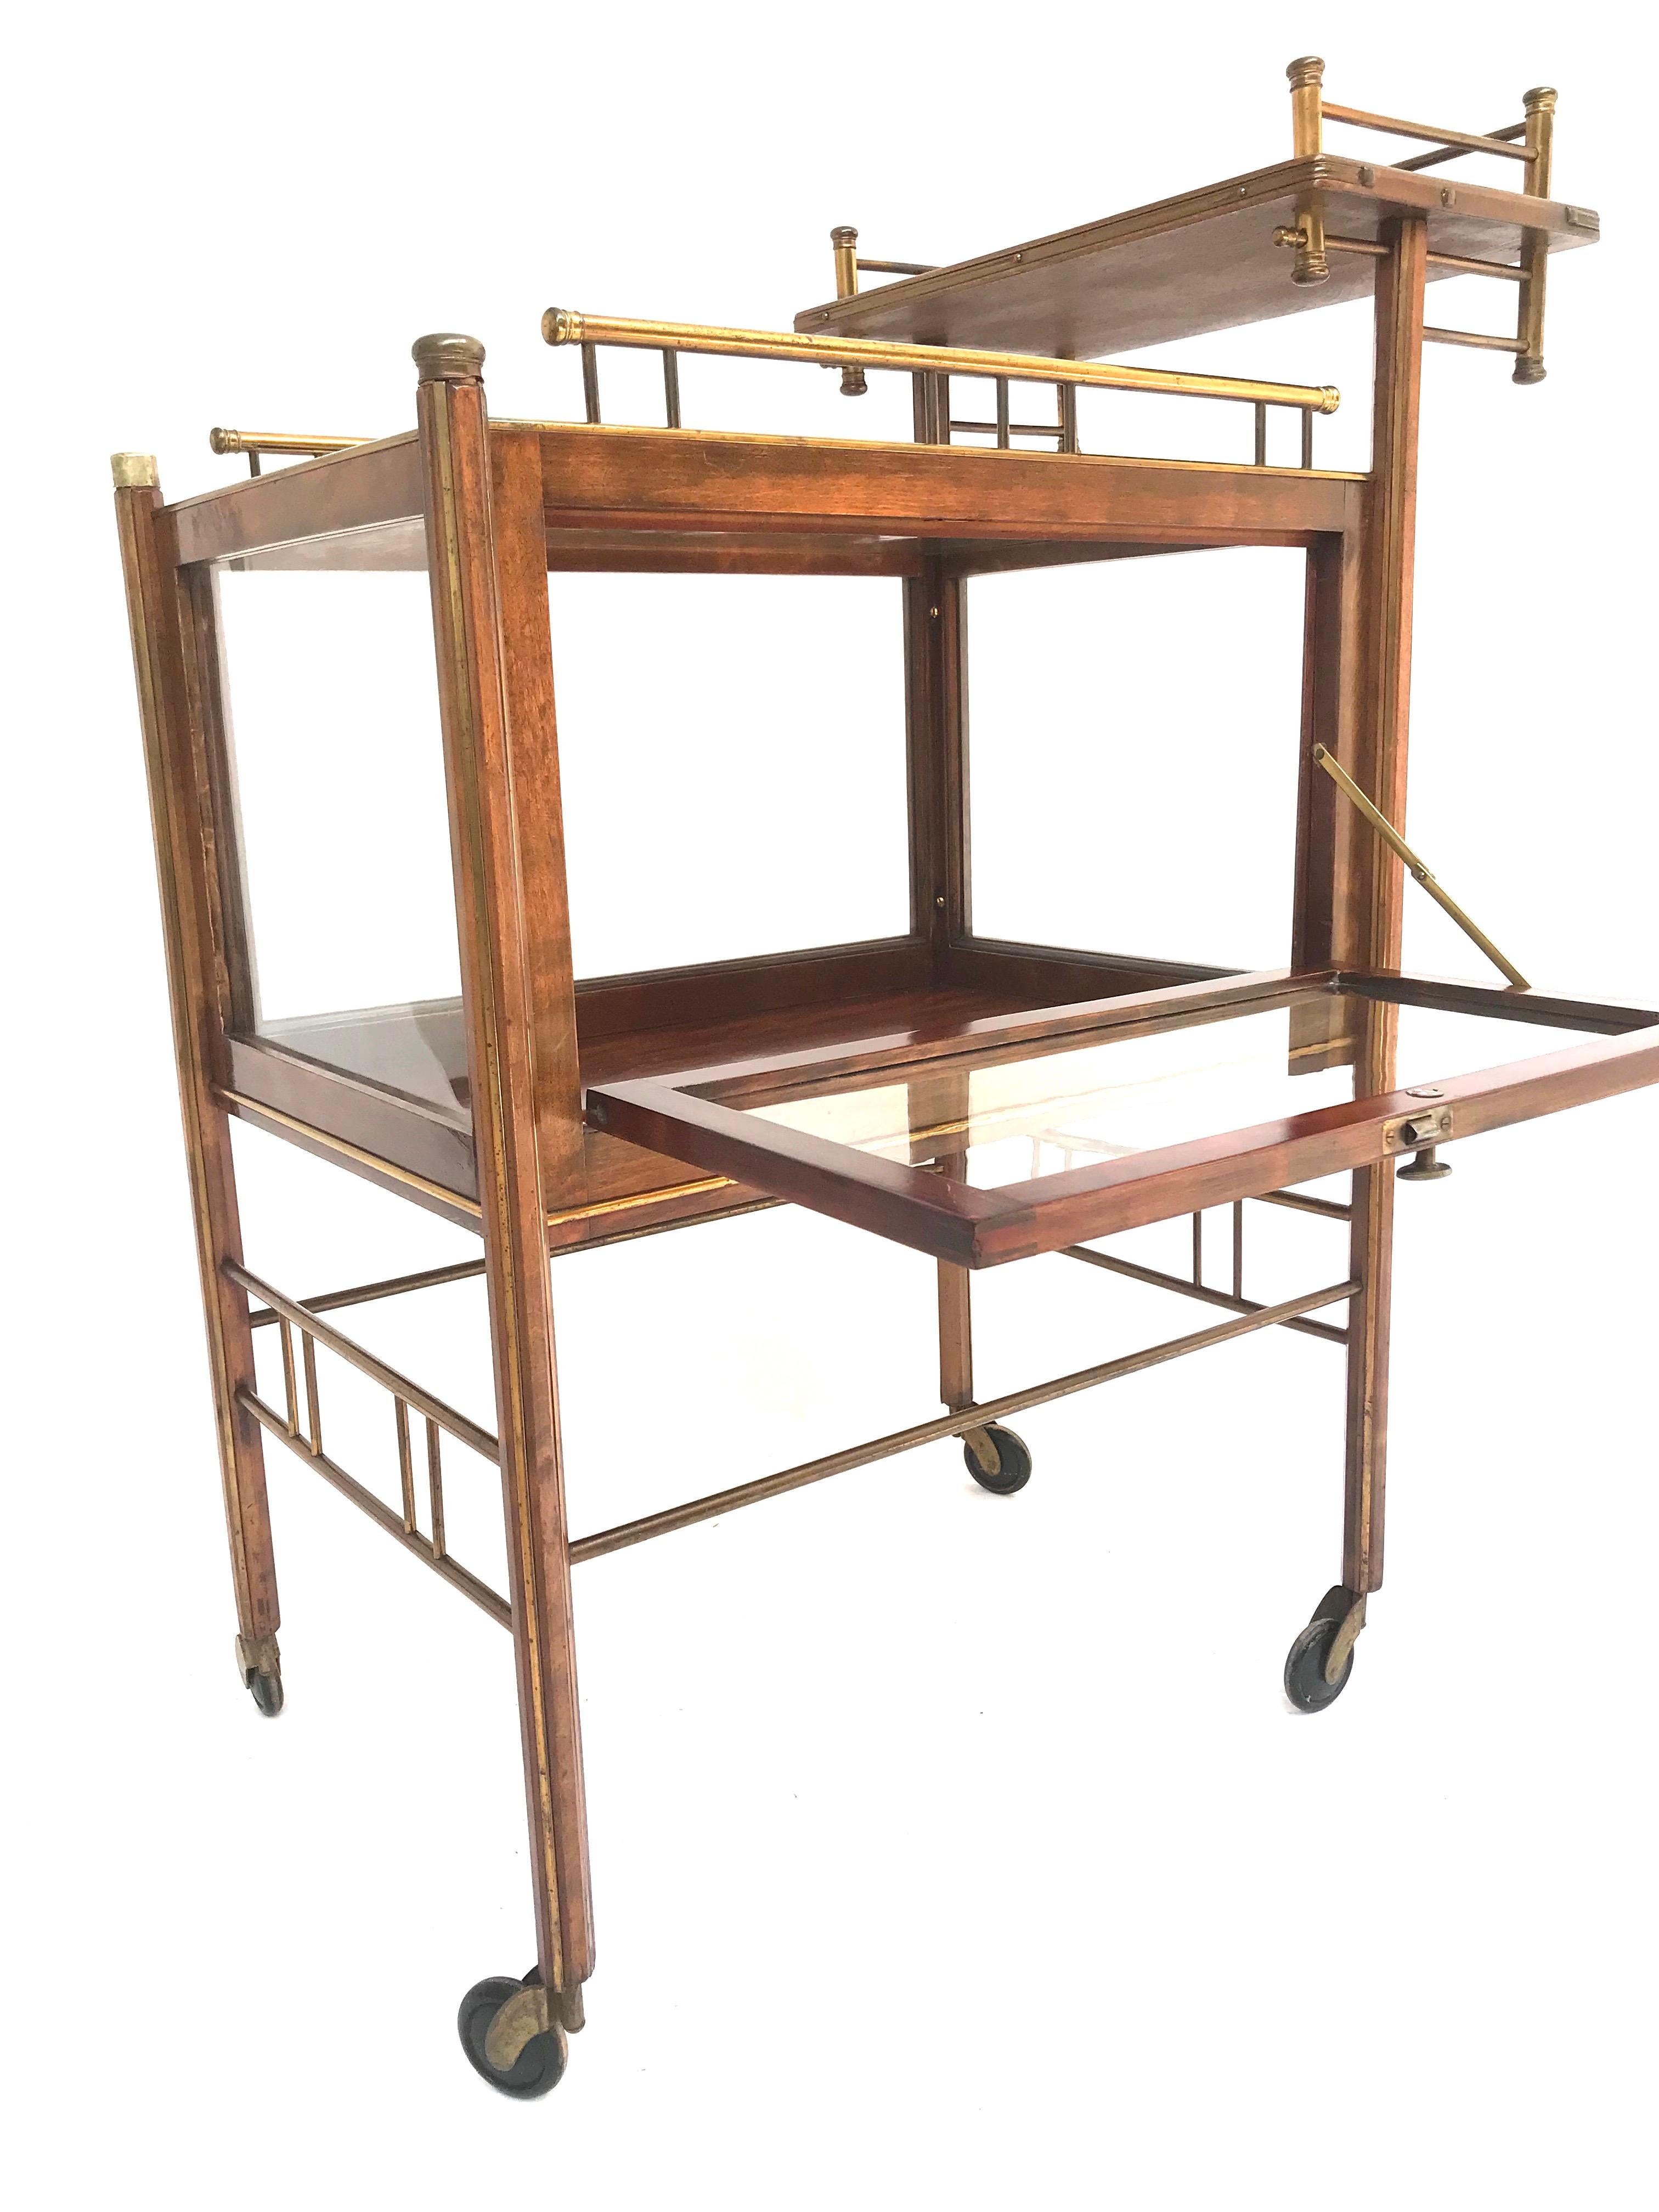 German Stunning Asymmetrical Arts & Crafts Wood, Brass & Glass Drinks Trolley or Cart For Sale